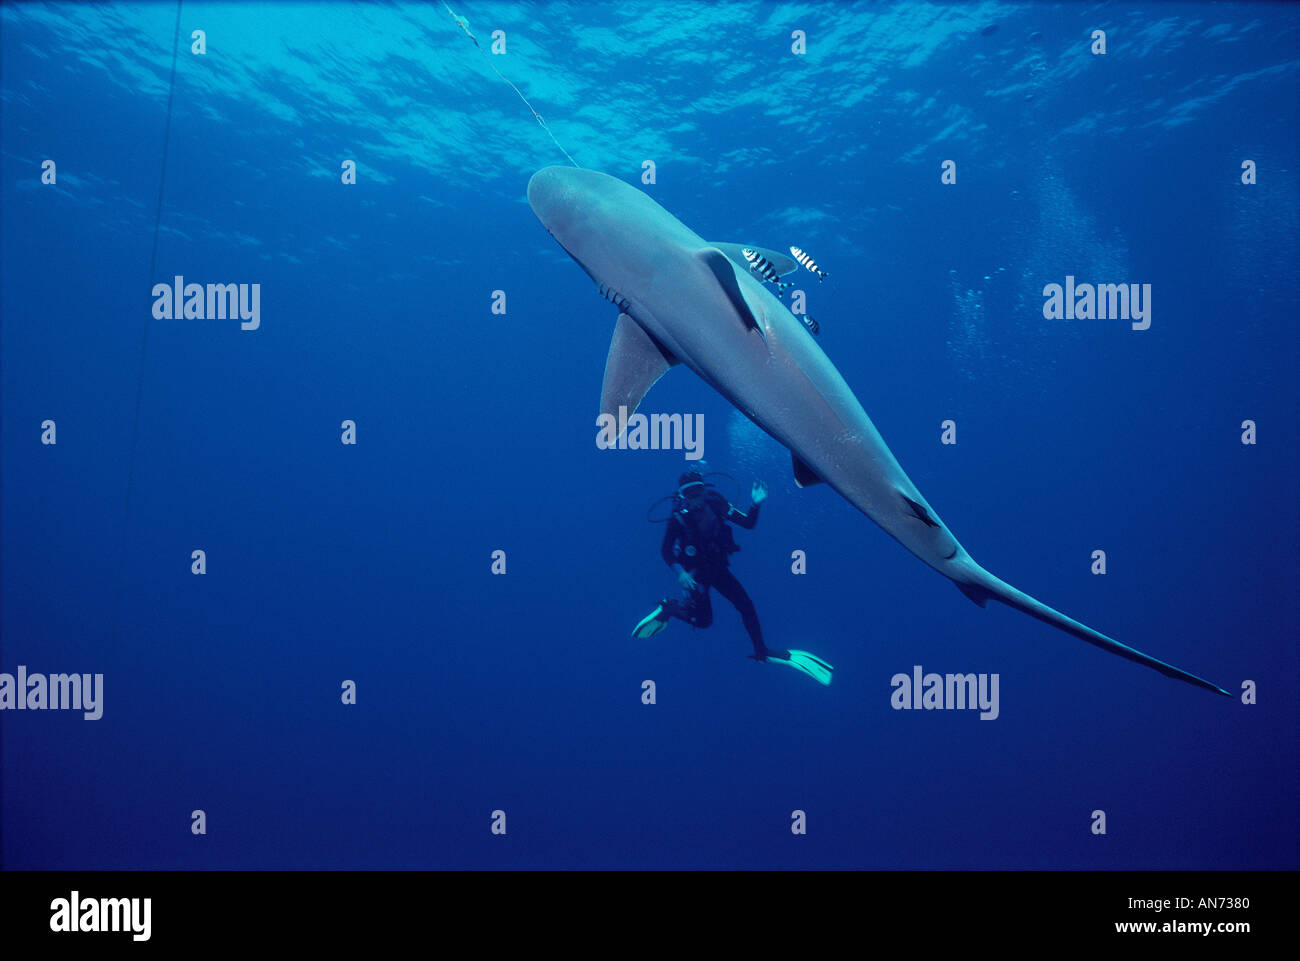 Sandbar Shark caught on long line fishing gear being observed by diver  Stock Photo - Alamy